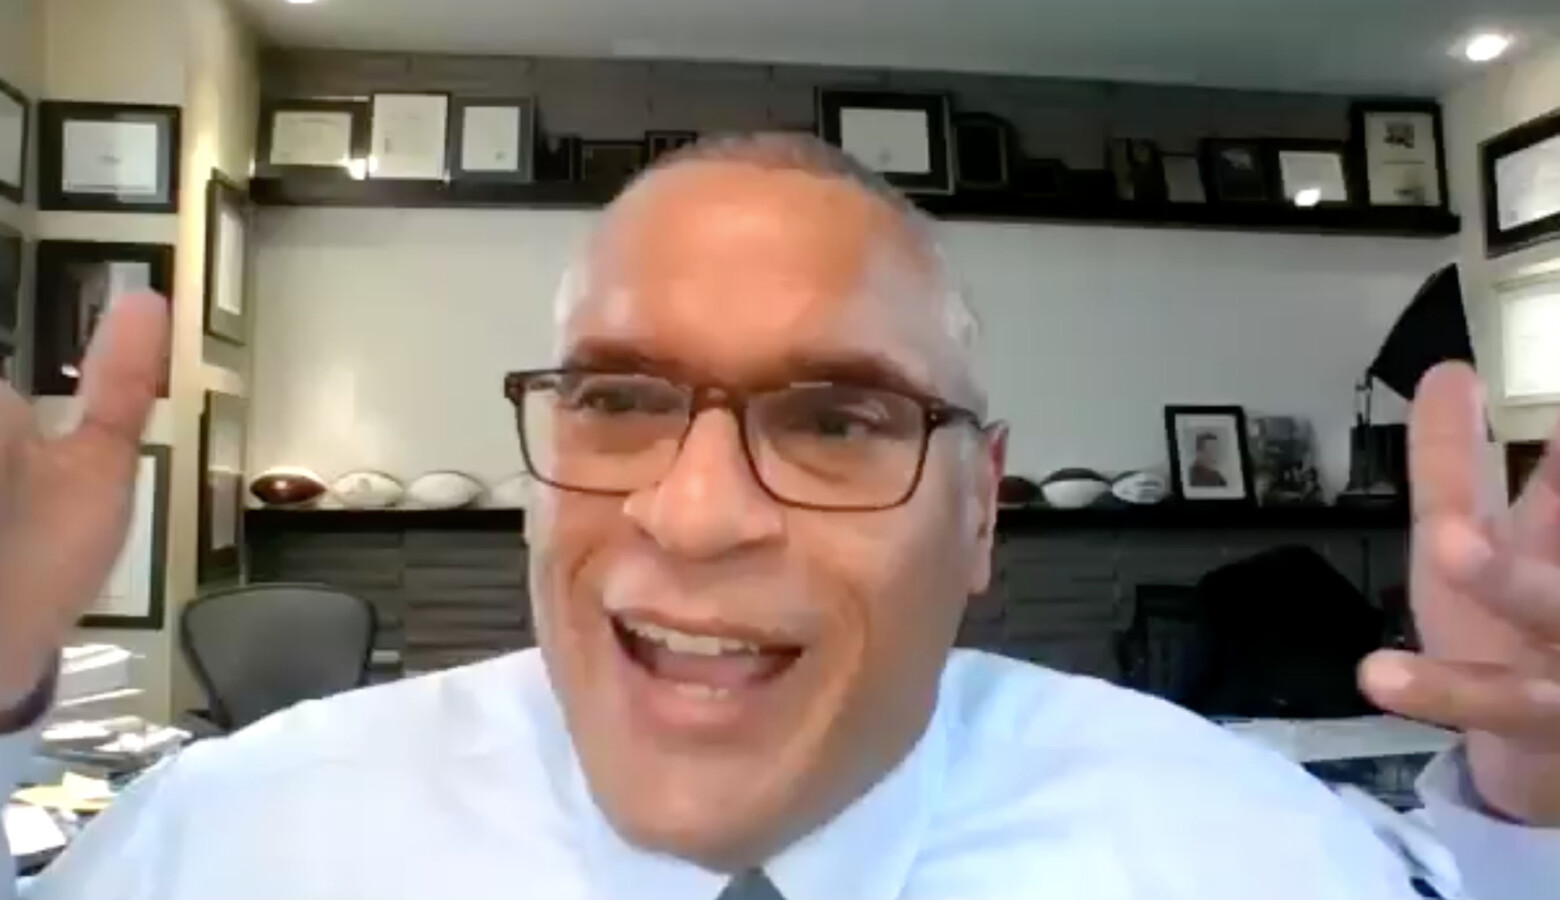 Democratic gubernatorial candidate Woody Myers discusses his criminal justice reform plan during a virtual interview. (Zoom screenshot)